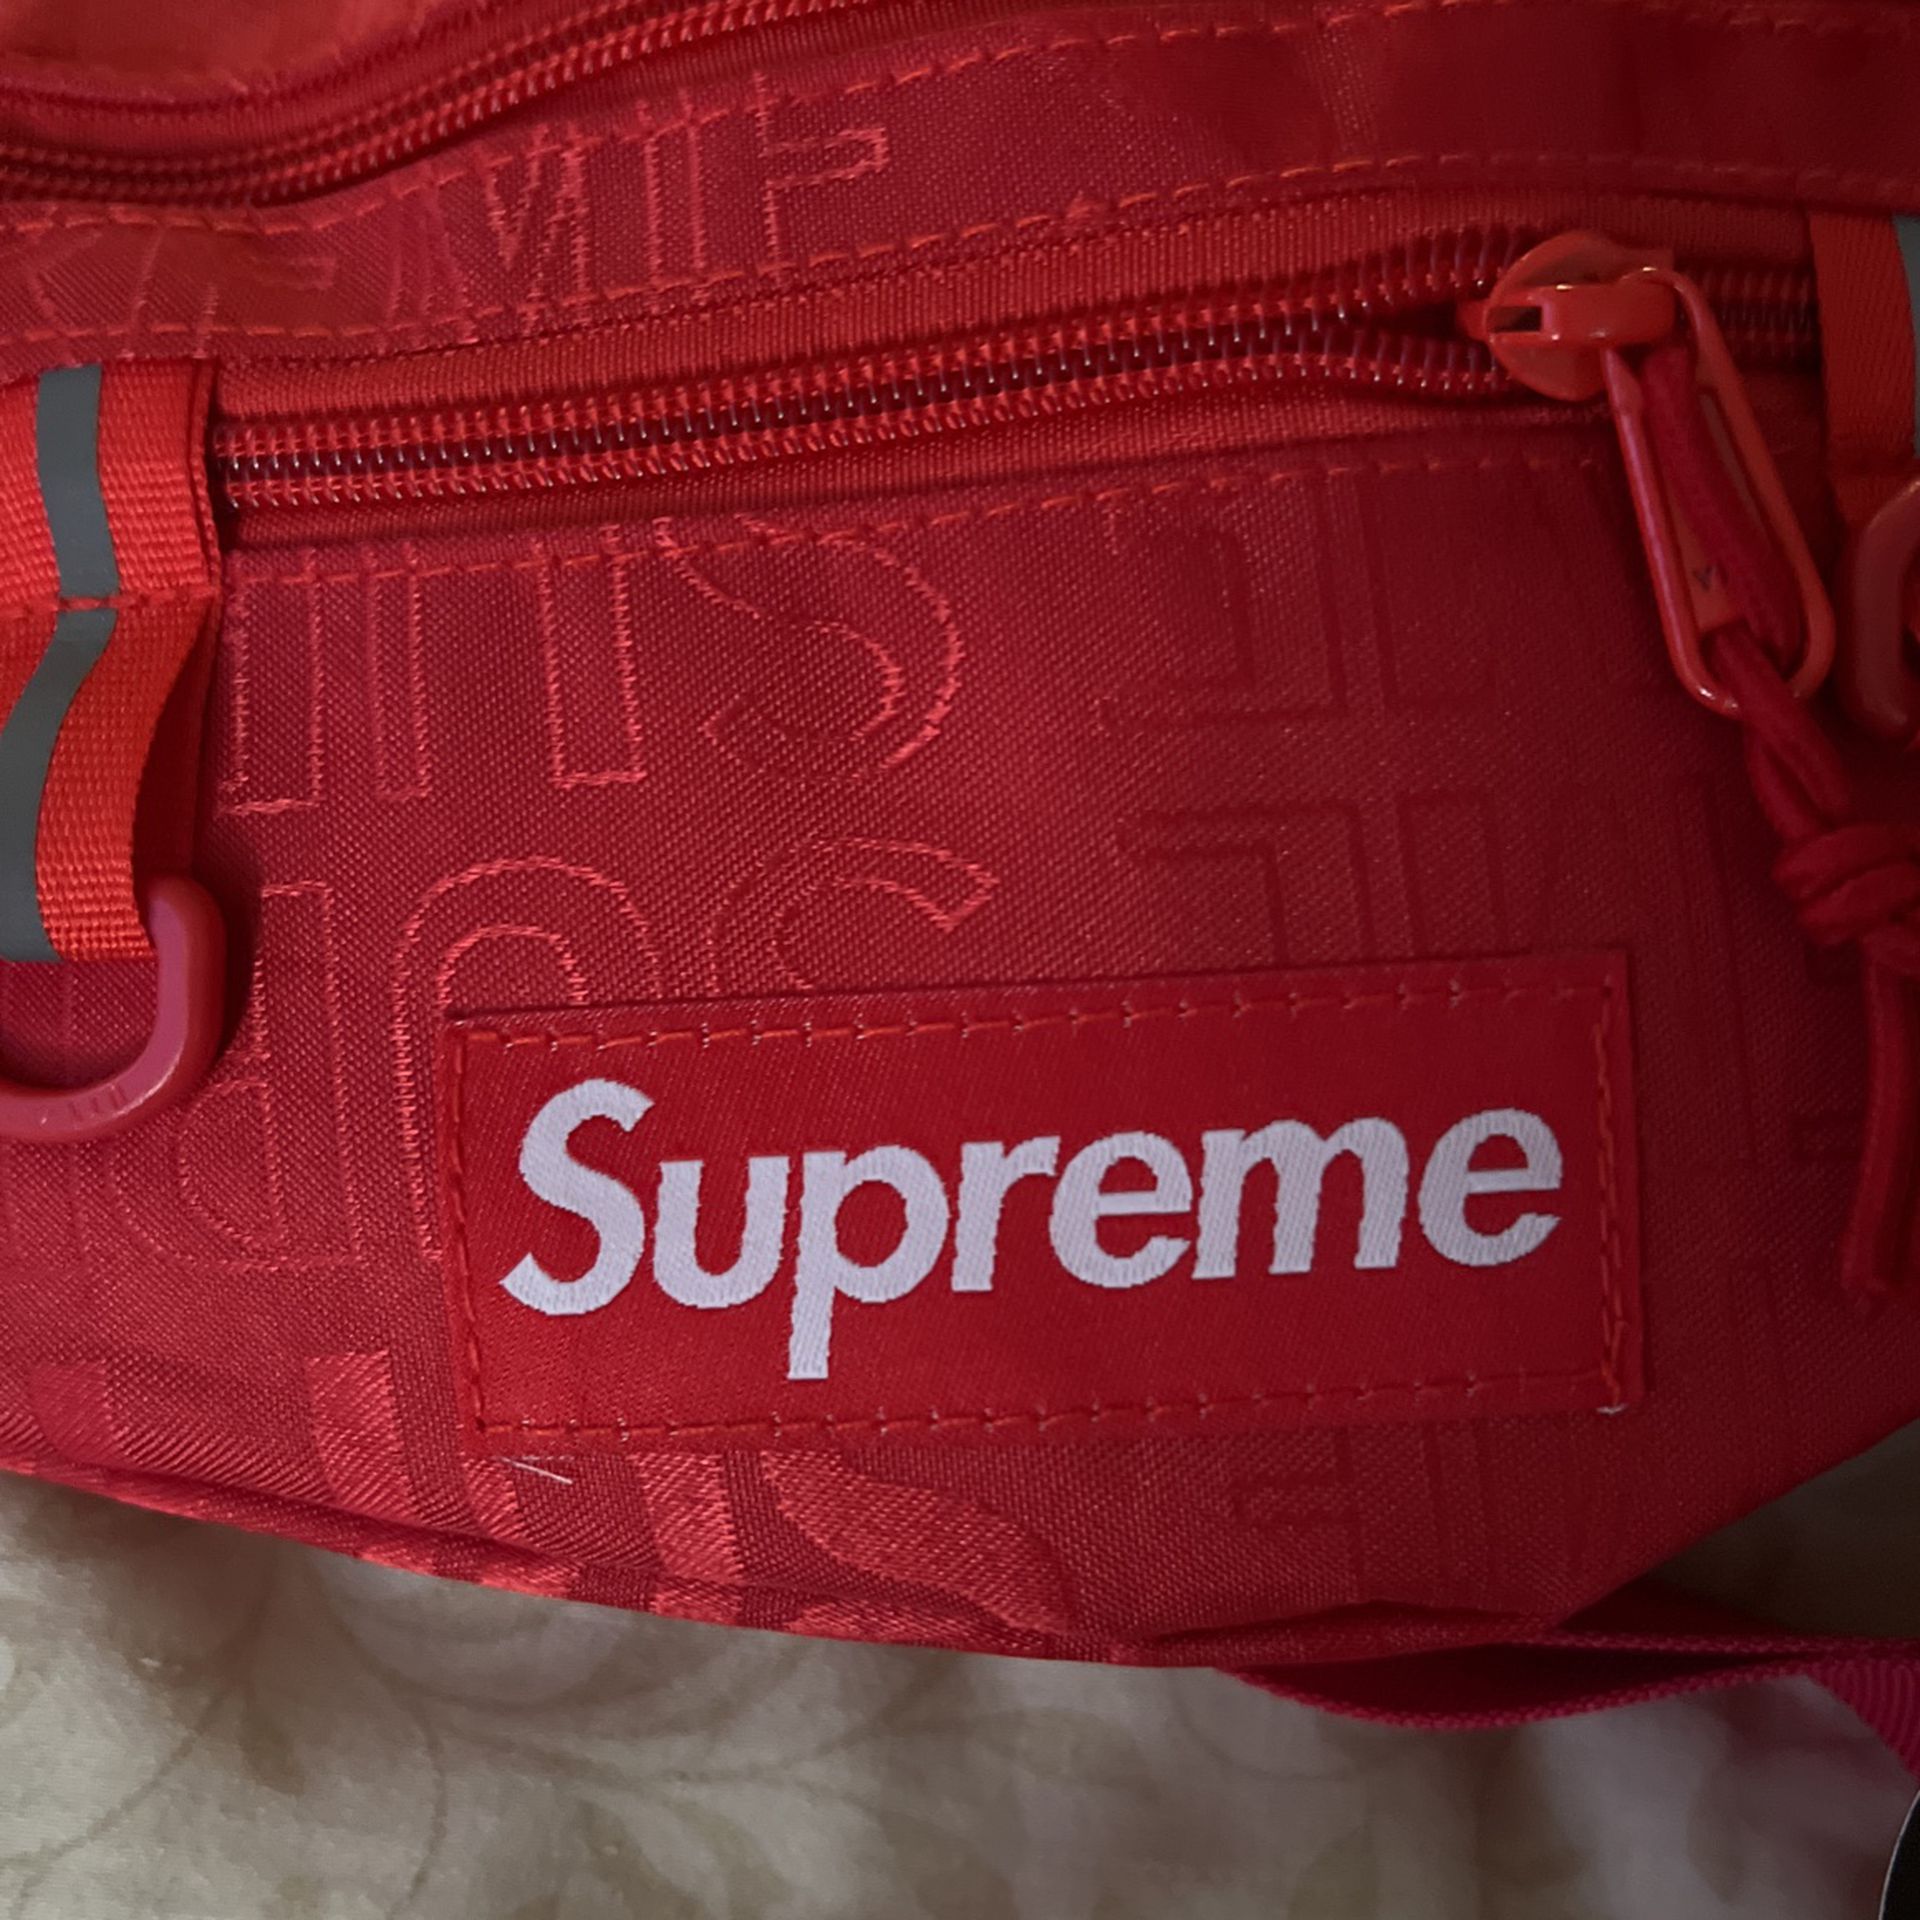 Supreme SS18 Waist Bag In Red for Sale in Coronado, - OfferUp